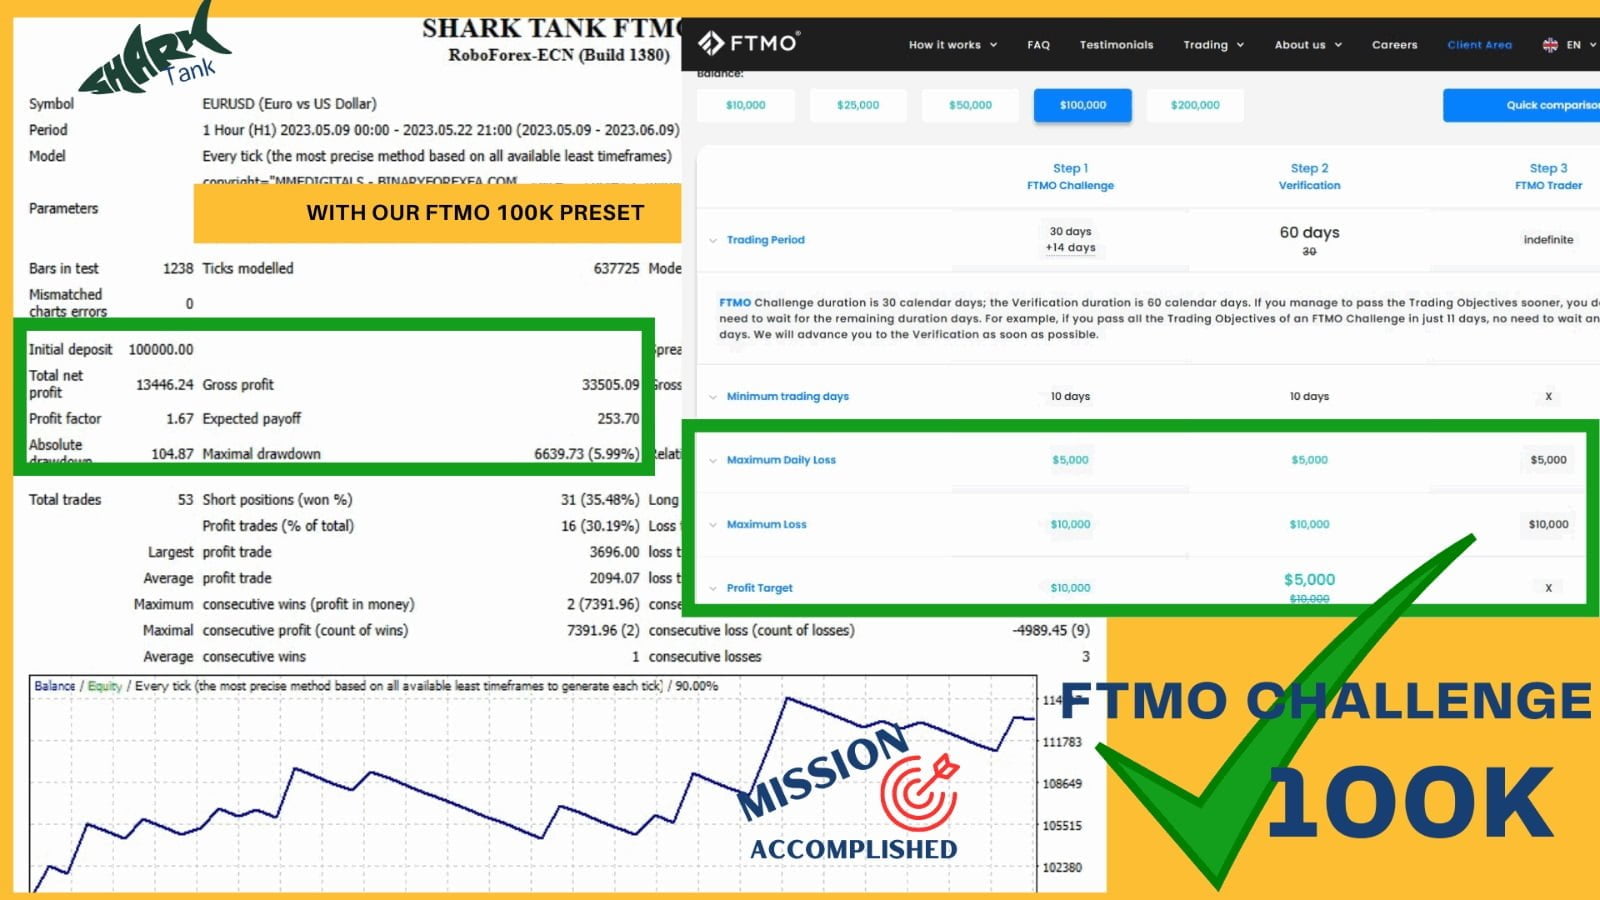 Forex Shark Tank FTMO Robot: Optimized for MT4 & H1, focuses on EURUSD & XAUUSD. Supports ECN accounts. Includes EA, 7 presets & guides. User-friendly & tech-savvy.